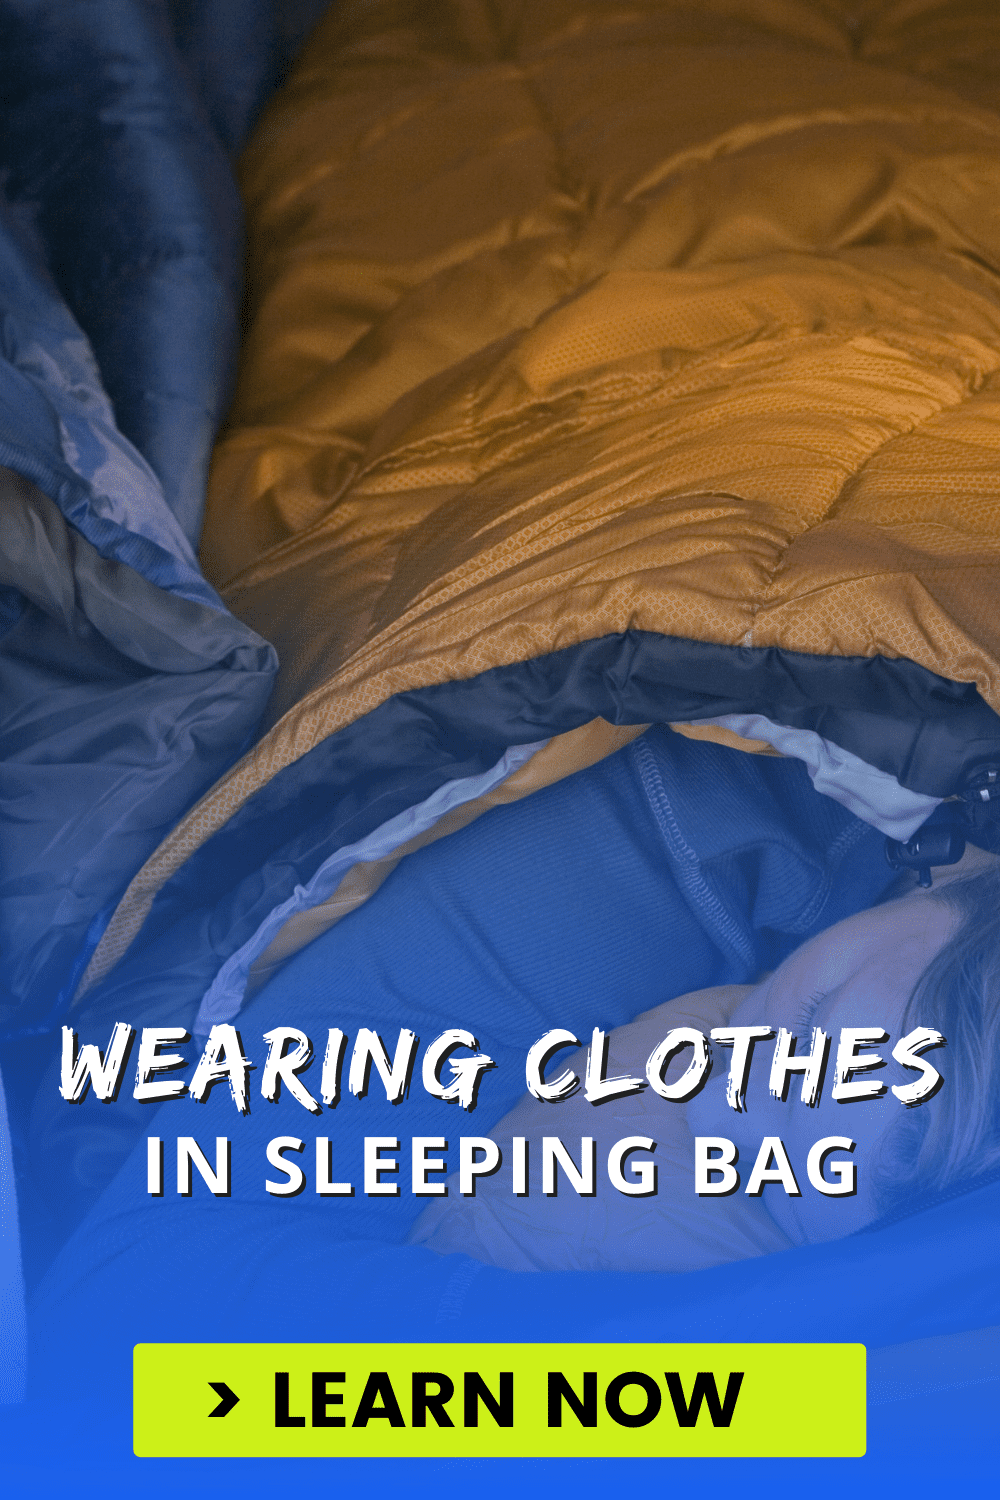 wearing clothes in sleeping bag - learn now